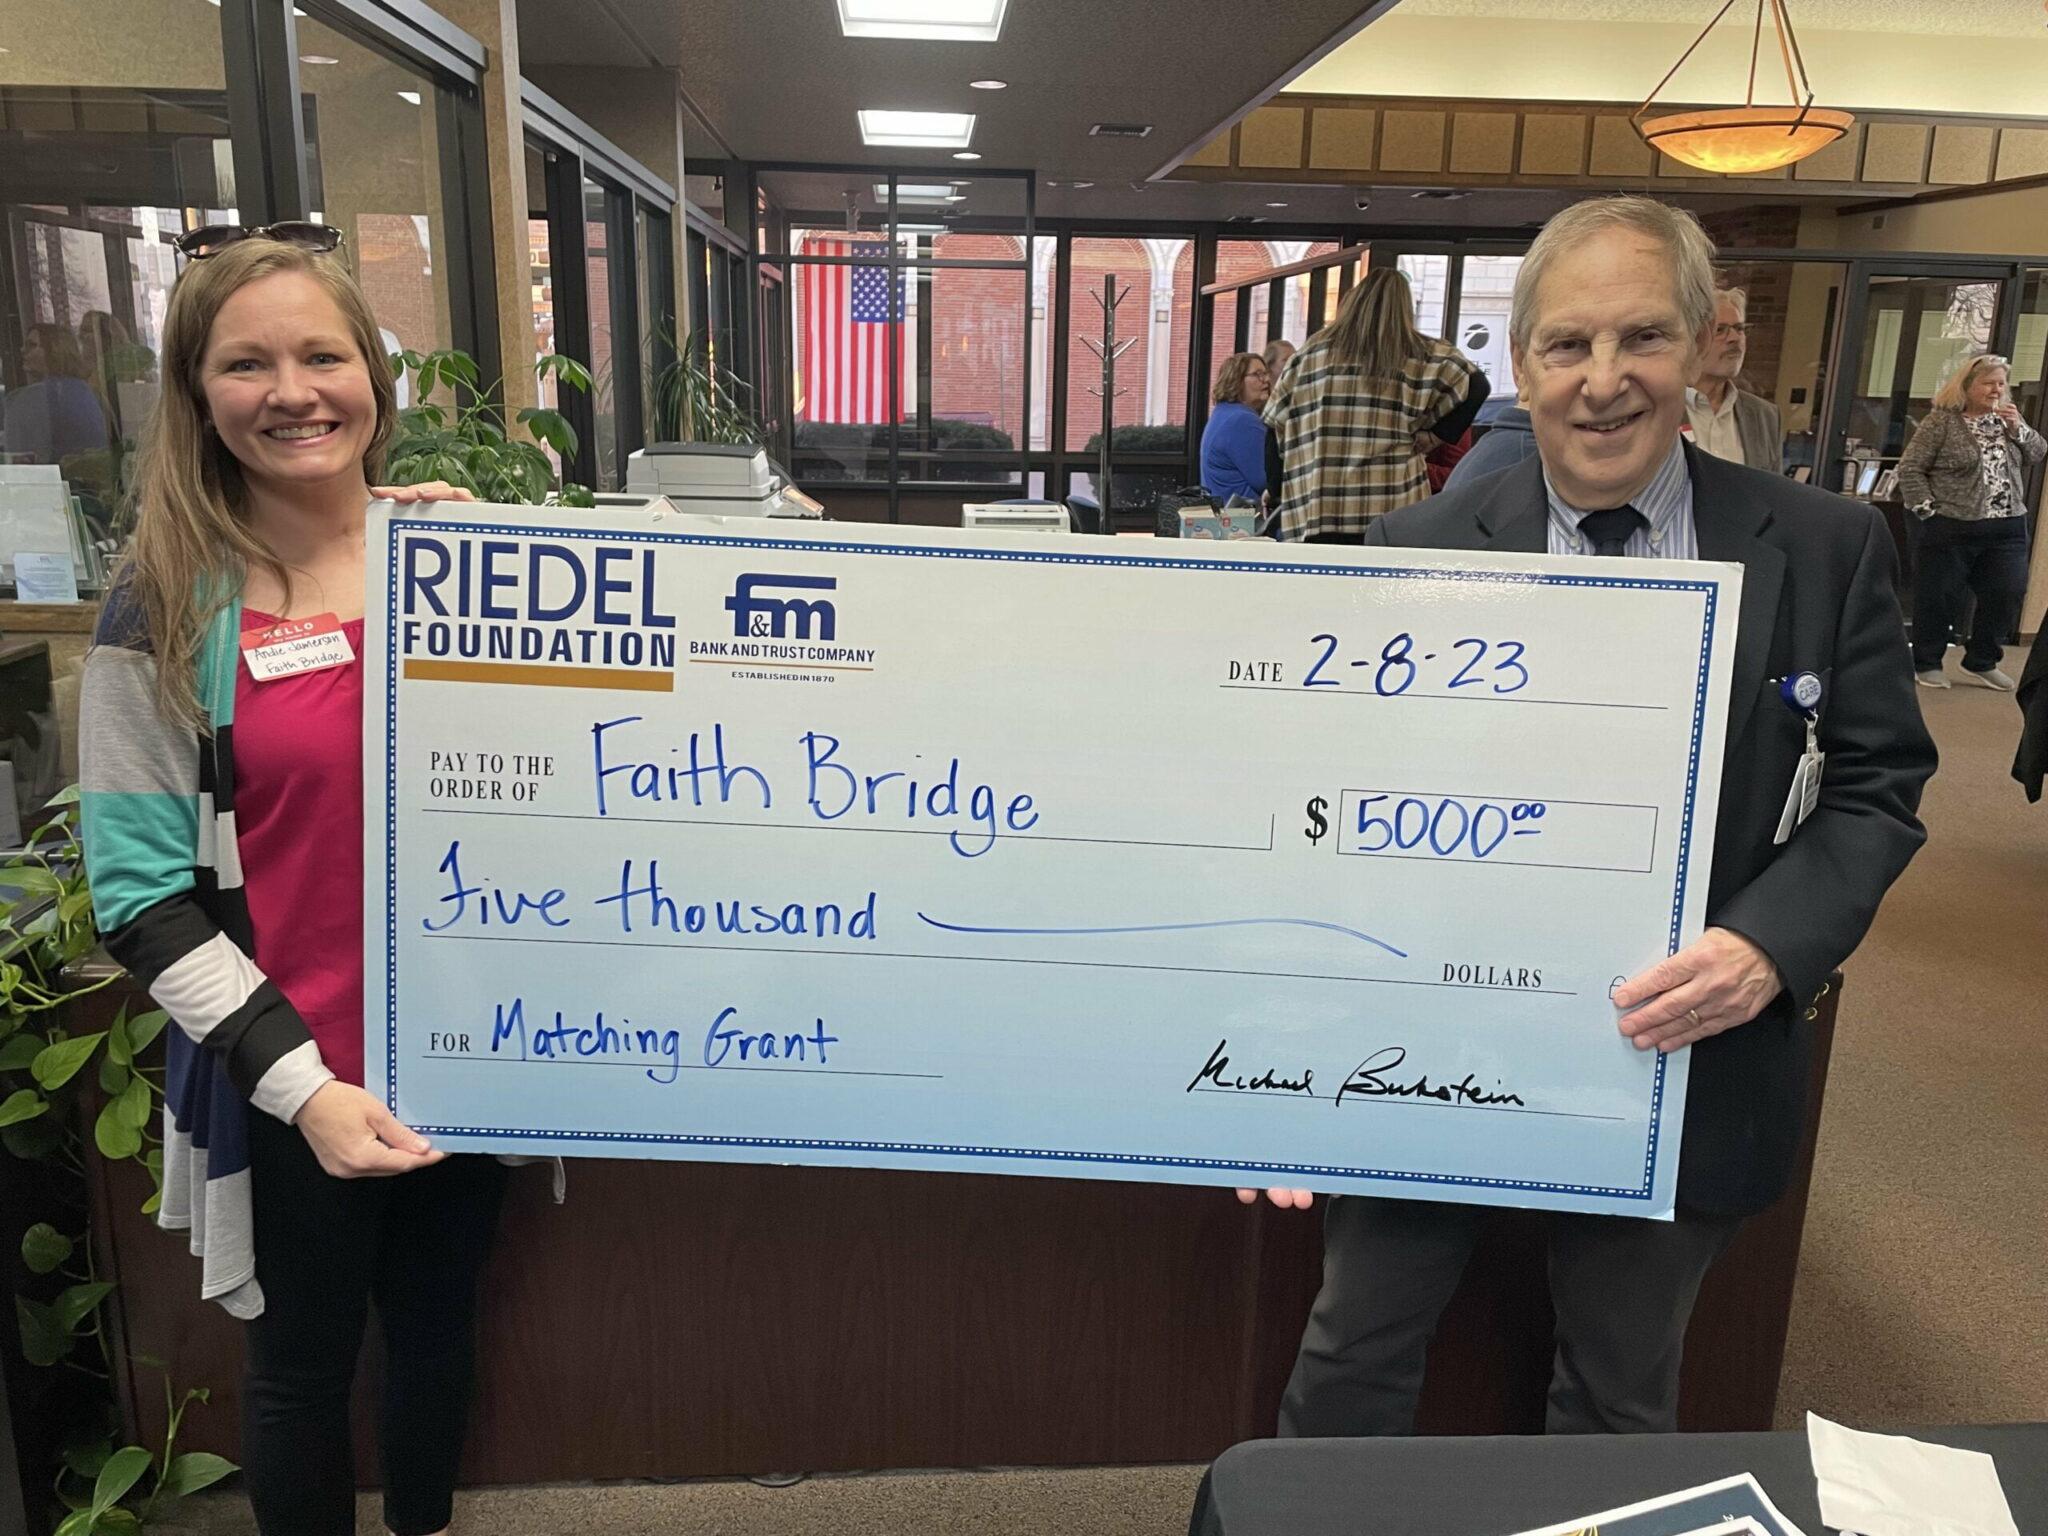 Riedel Foundation Lead Trustee Michael Bukstein presents a $5,000 matching grant to Faith Bridge Director Andie Jamerson.